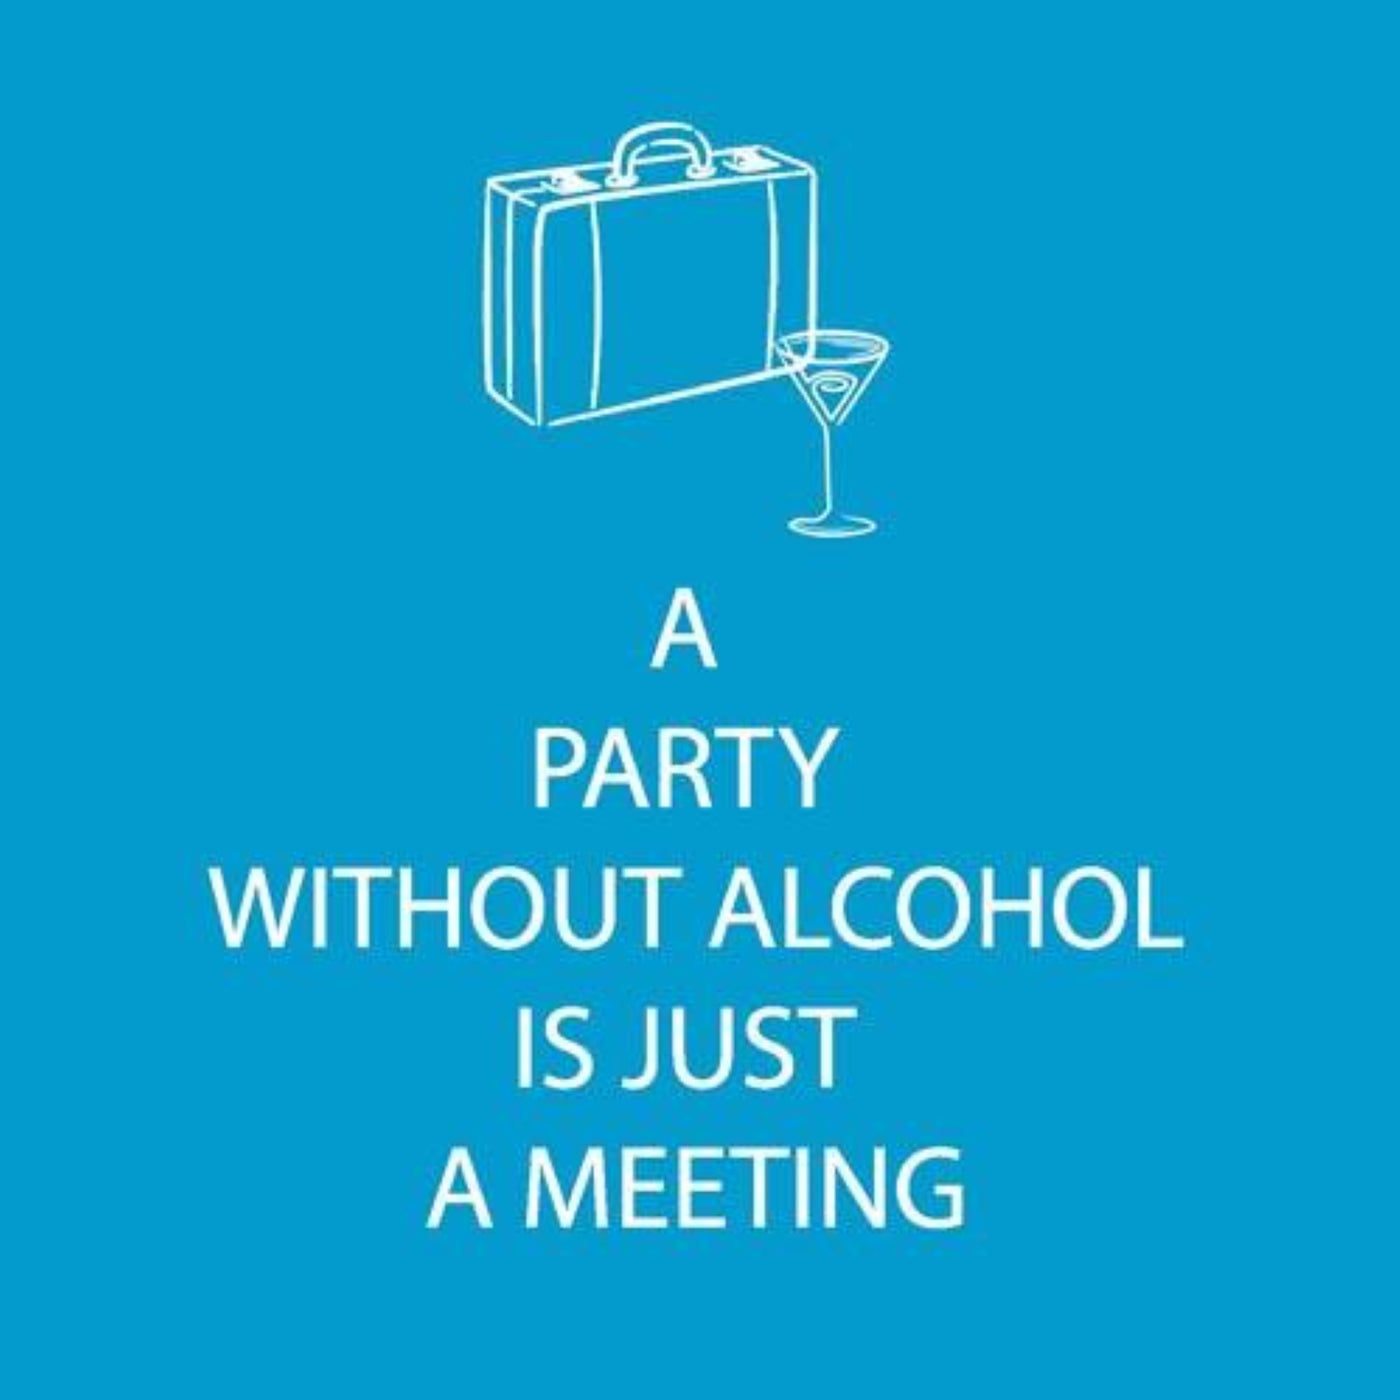 A Party Without Alcohol is Just a Meeting